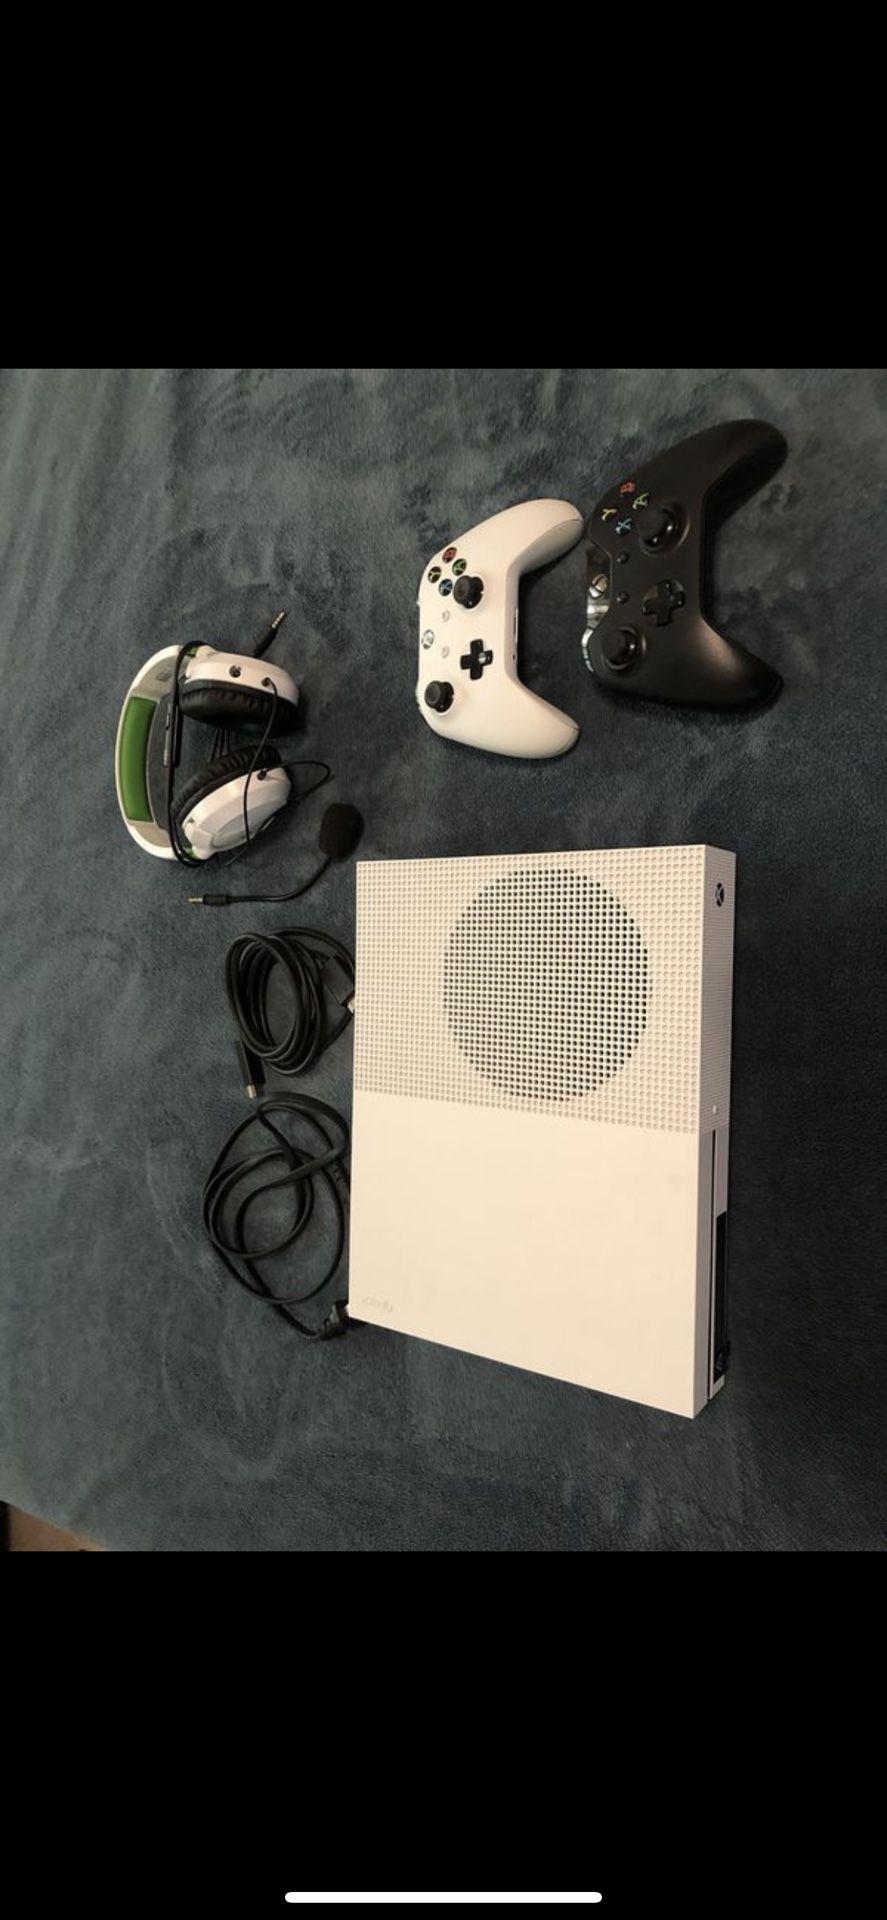 Xbox One S + Games and Accessories